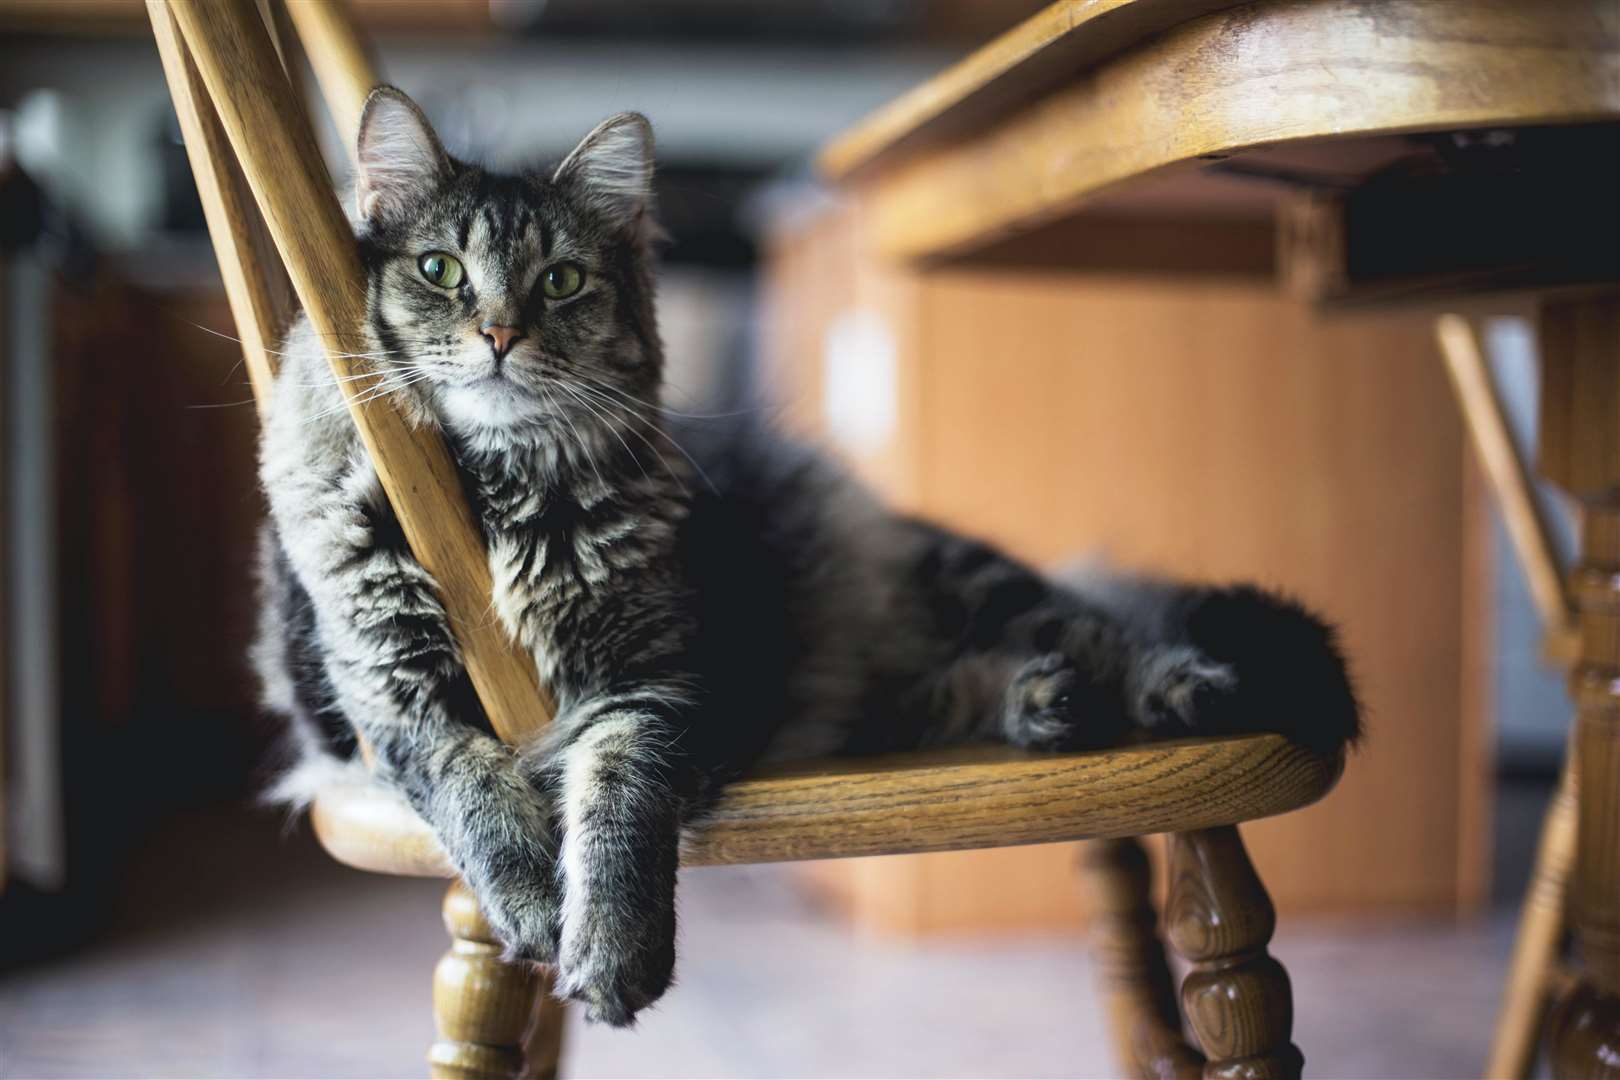 Cats will knead on soft surfaces like fluffy throws, or when getting cosy or on your lap when you are making a fuss over them. Picture: Kari Shea, unsplash